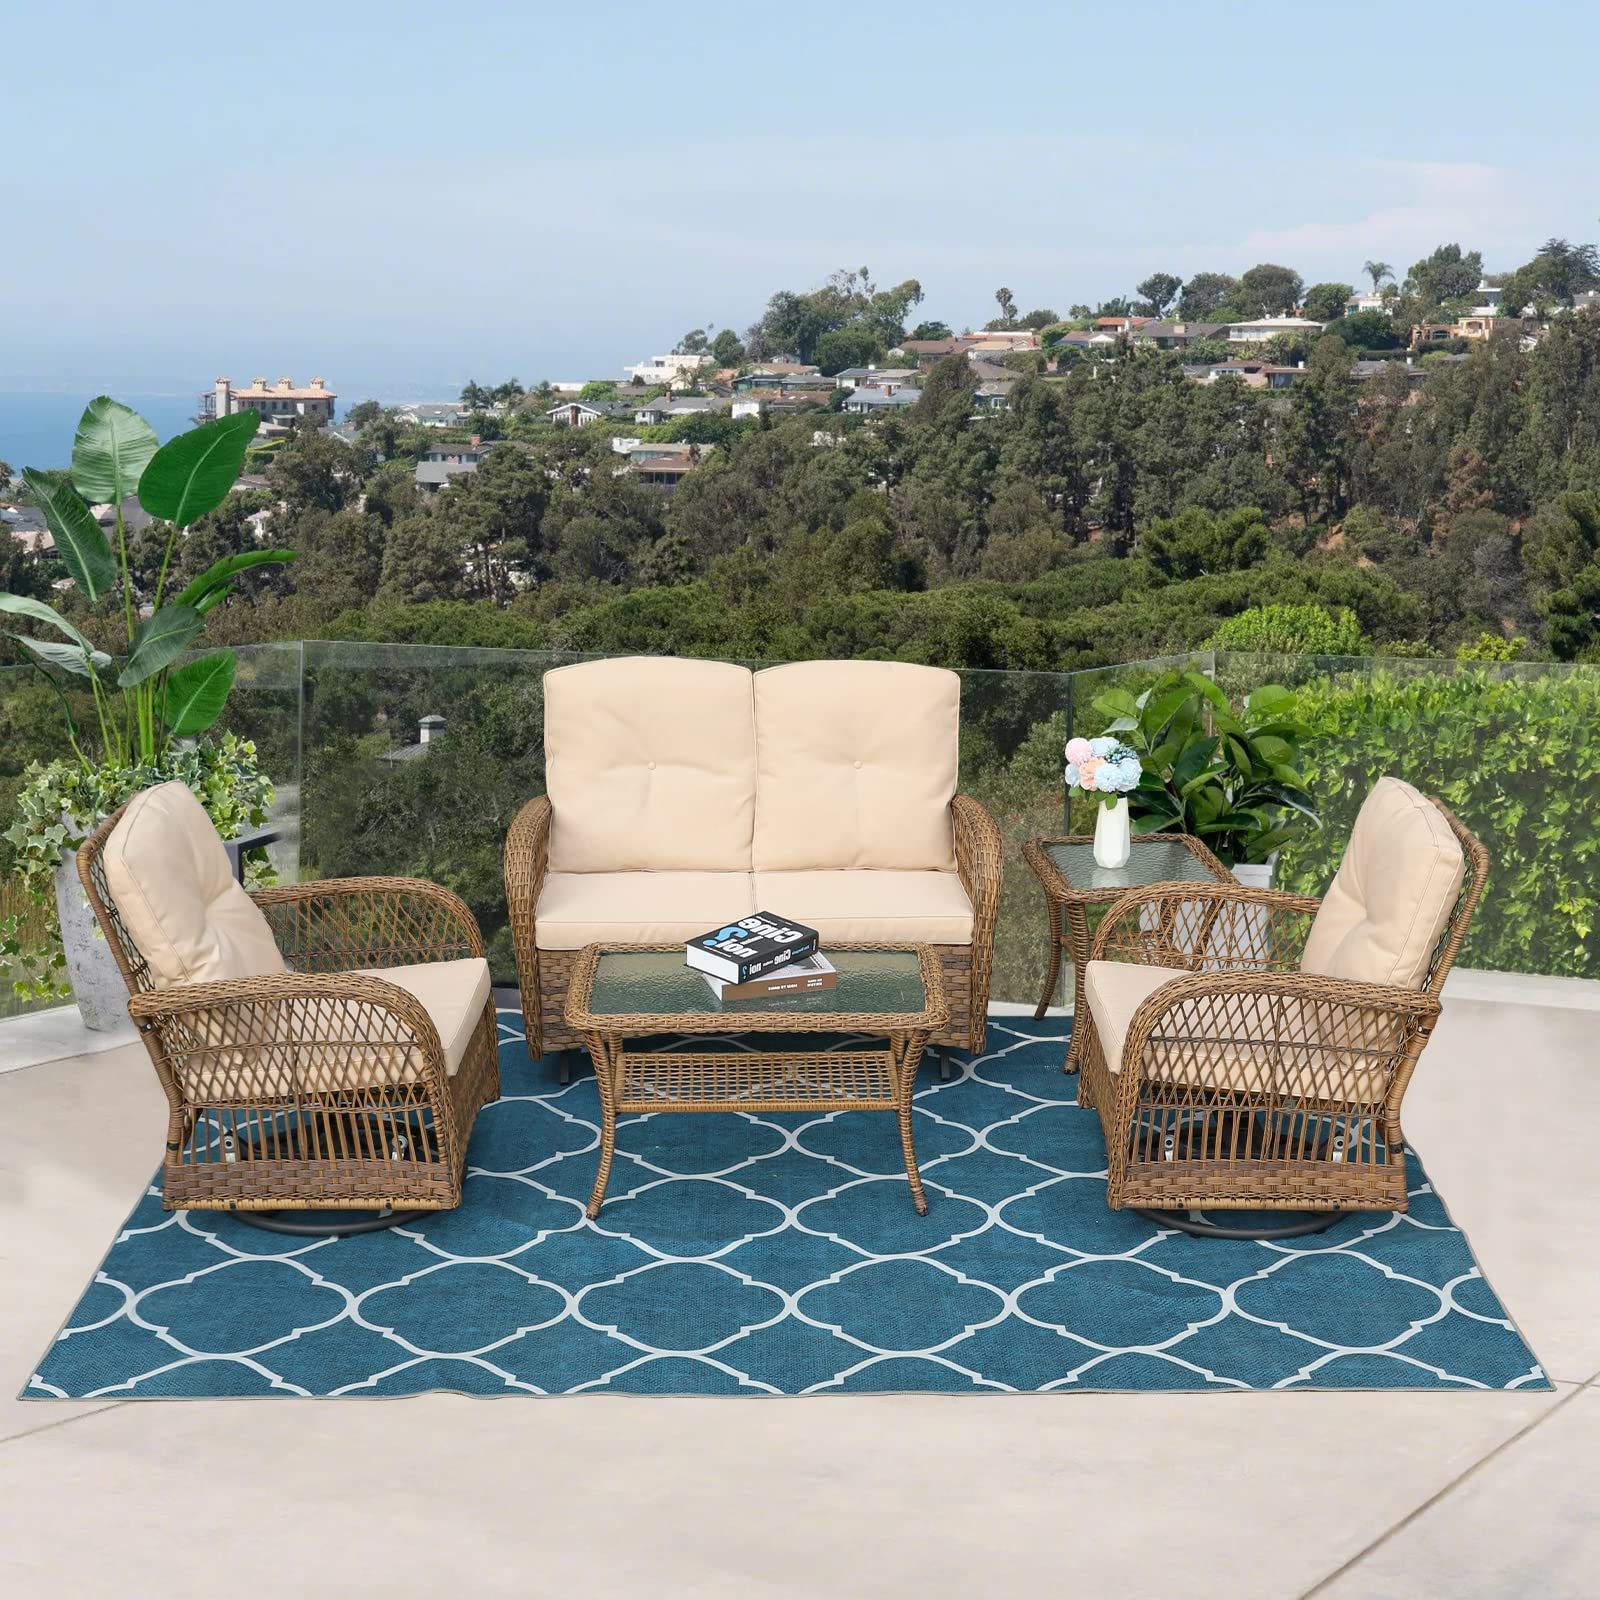 Most Popular Amazon: Vivijason 5 Piece Outdoor Patio Wicker Conversation Sets, All  Weather Outdoor Rattan Furniture Set Includes Glider Loveseat, 2 Coffee  Table, 2 Swivel Gliders Chairs With Cushions, Light Brown : Patio, Lawn &  Garden Within 2 Piece Swivel Gliders With Patio Cover (View 6 of 15)